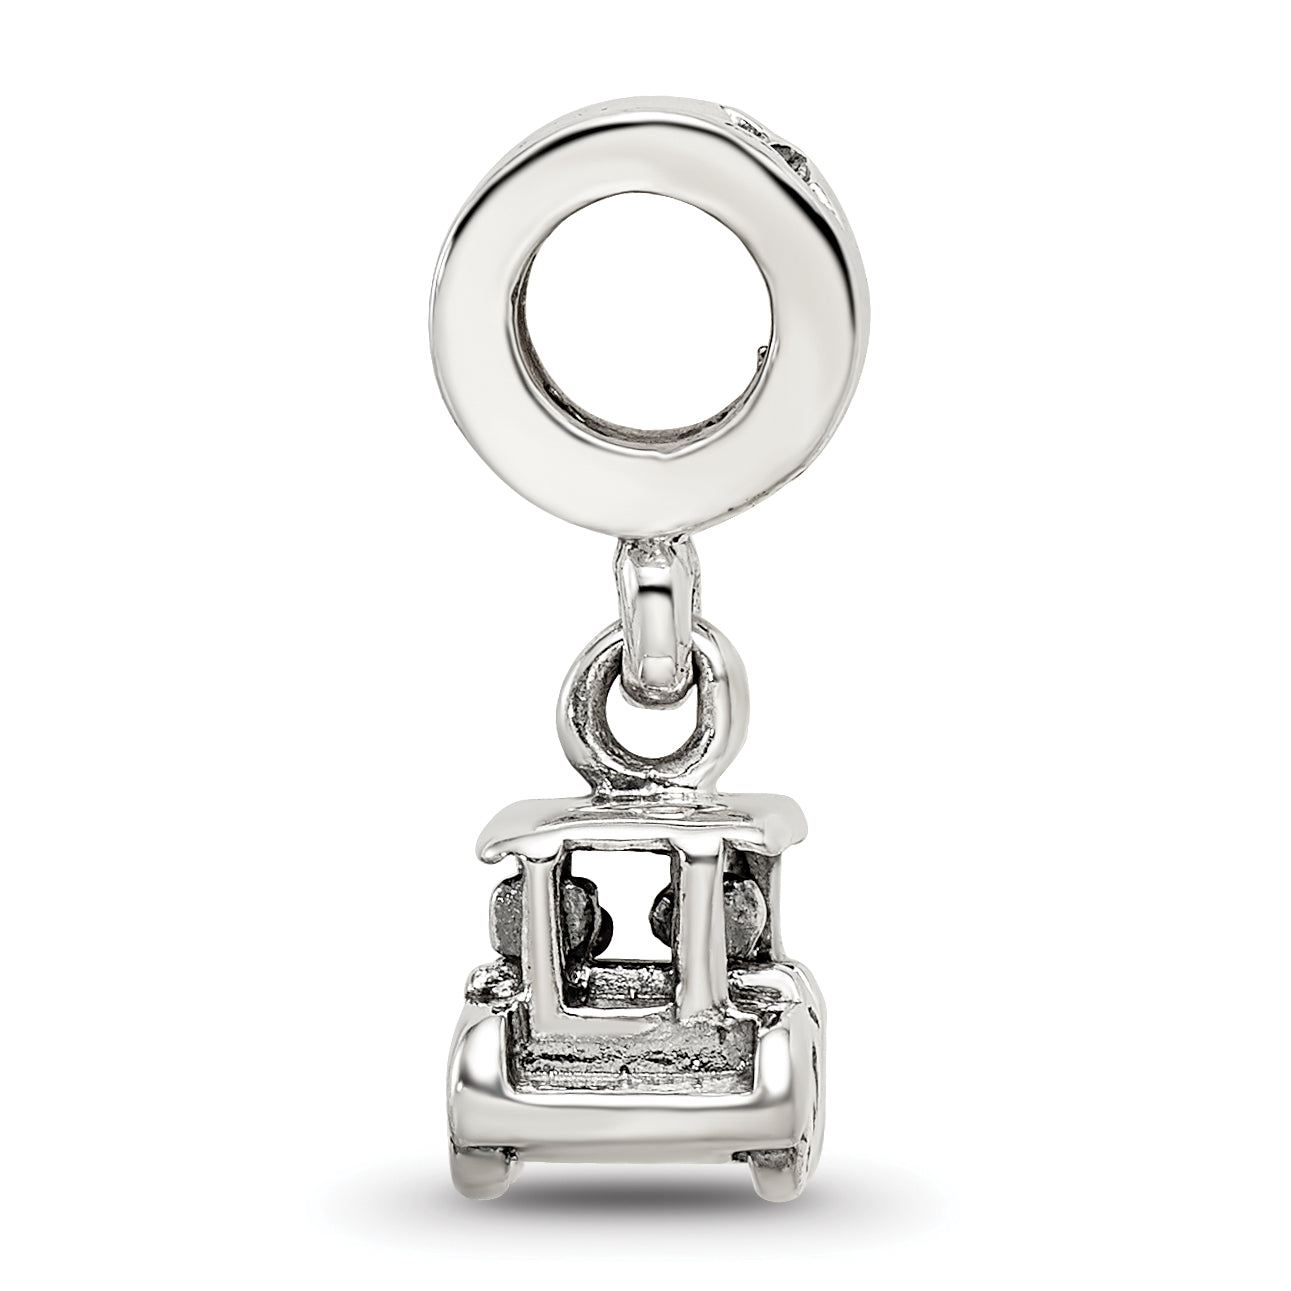 Sterling Silver Reflections Golf Cart Dangle Bead